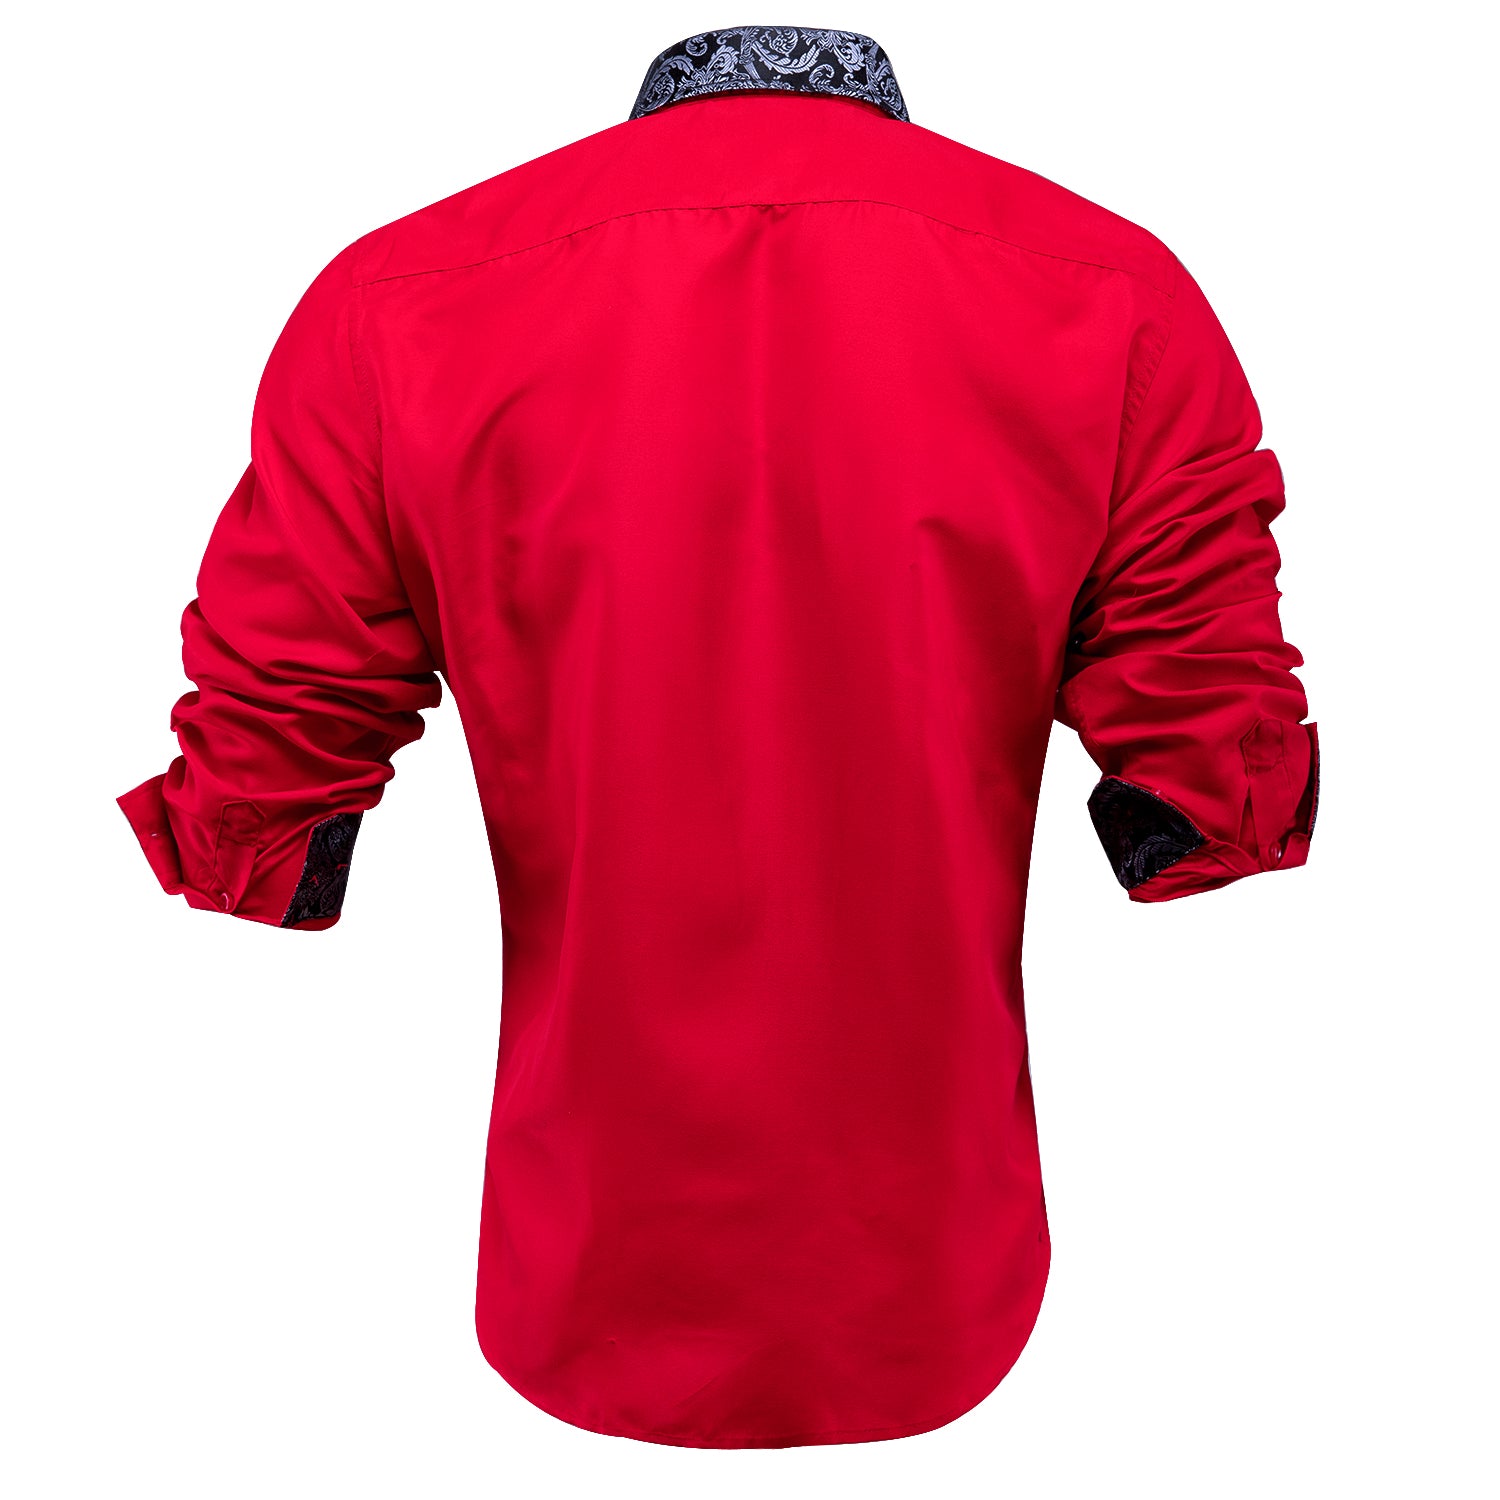 Clearance Sale Red Black Stitching Shirt